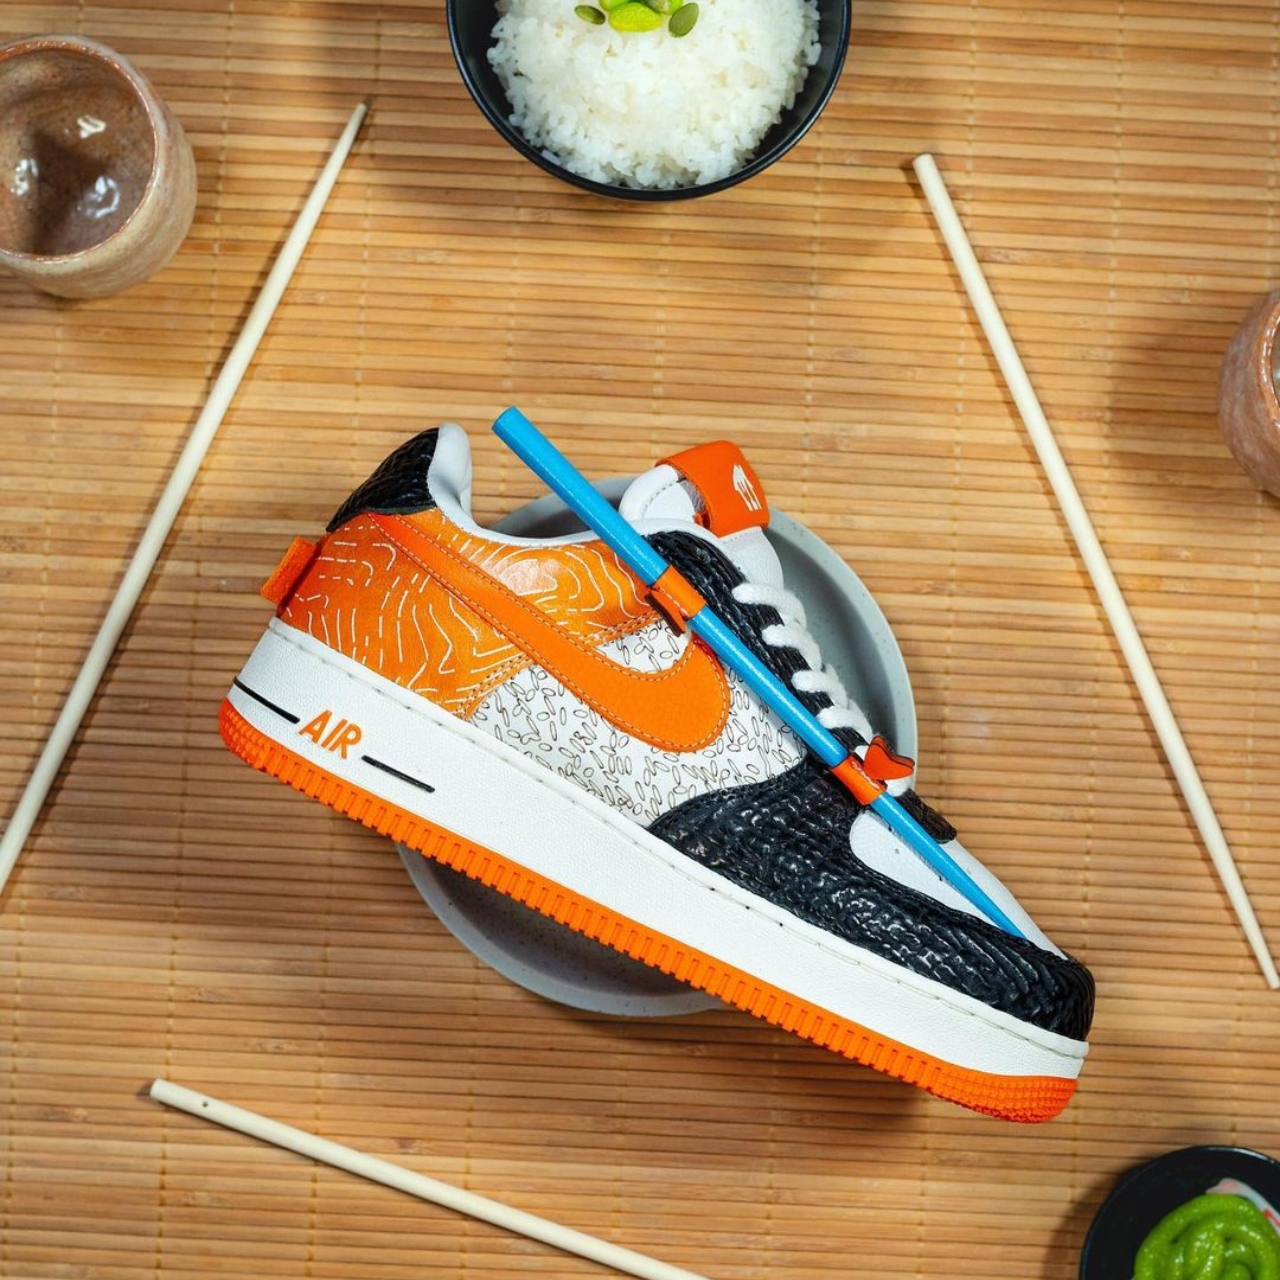 Nike’s salmon sushi-inspired sneakers come with in-built chopsticks for when the hunger-pangs strike